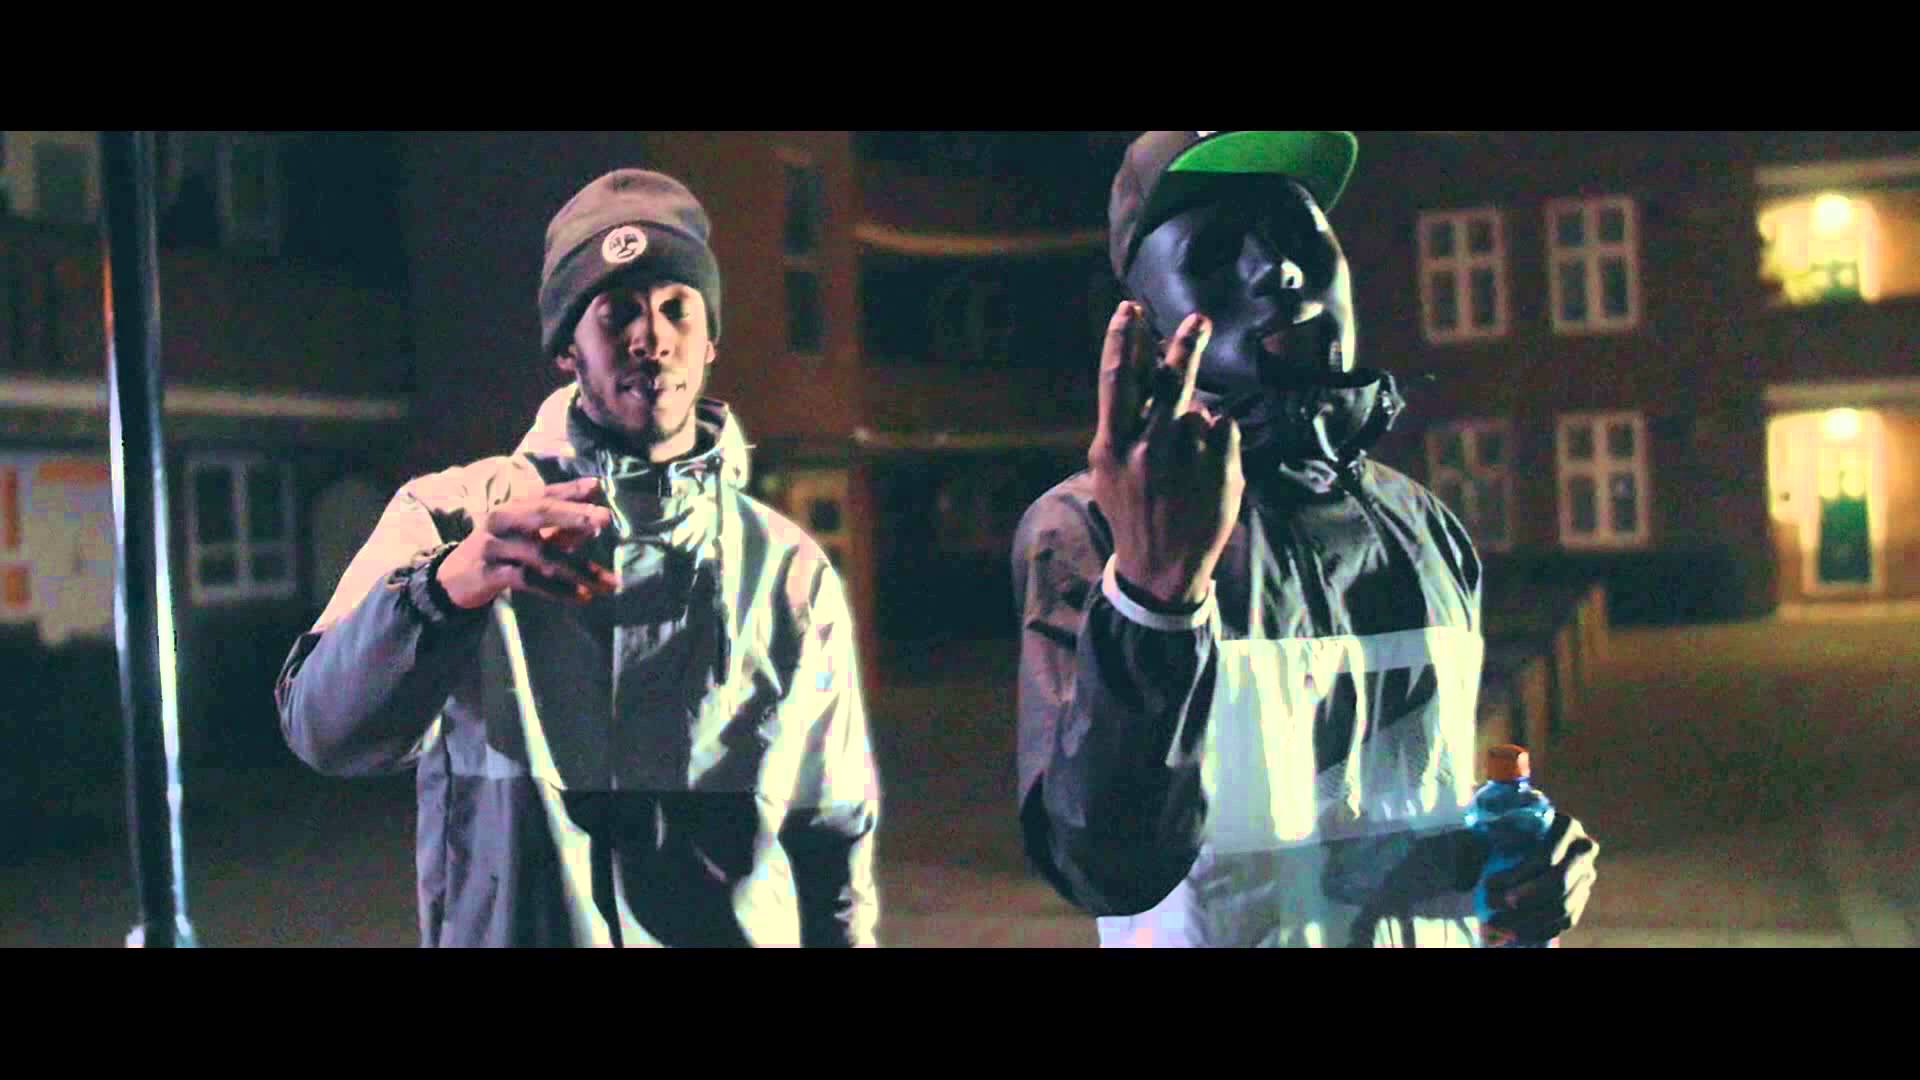 StampFace (86) x LD (67) - I Trap [Music Video] @StampFace1up @Scribz6ix7even | Link Up TV